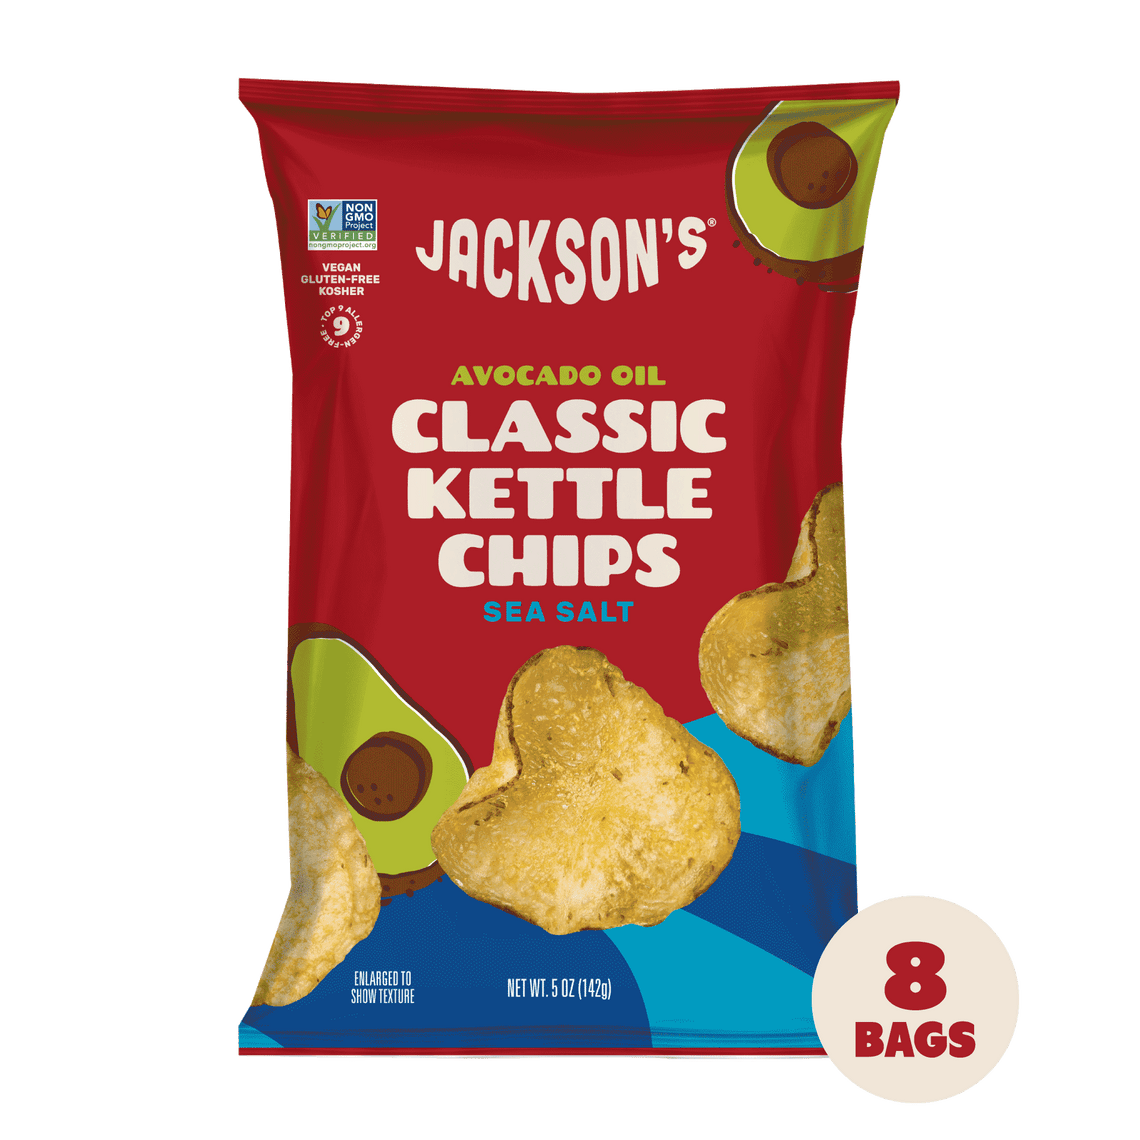 Jackson's Classic Kettle Chips Sea Salt flavor, 8 pack of 5oz bags, cooked in premium avocado oil, Kettle Cooked Potato Chips. 